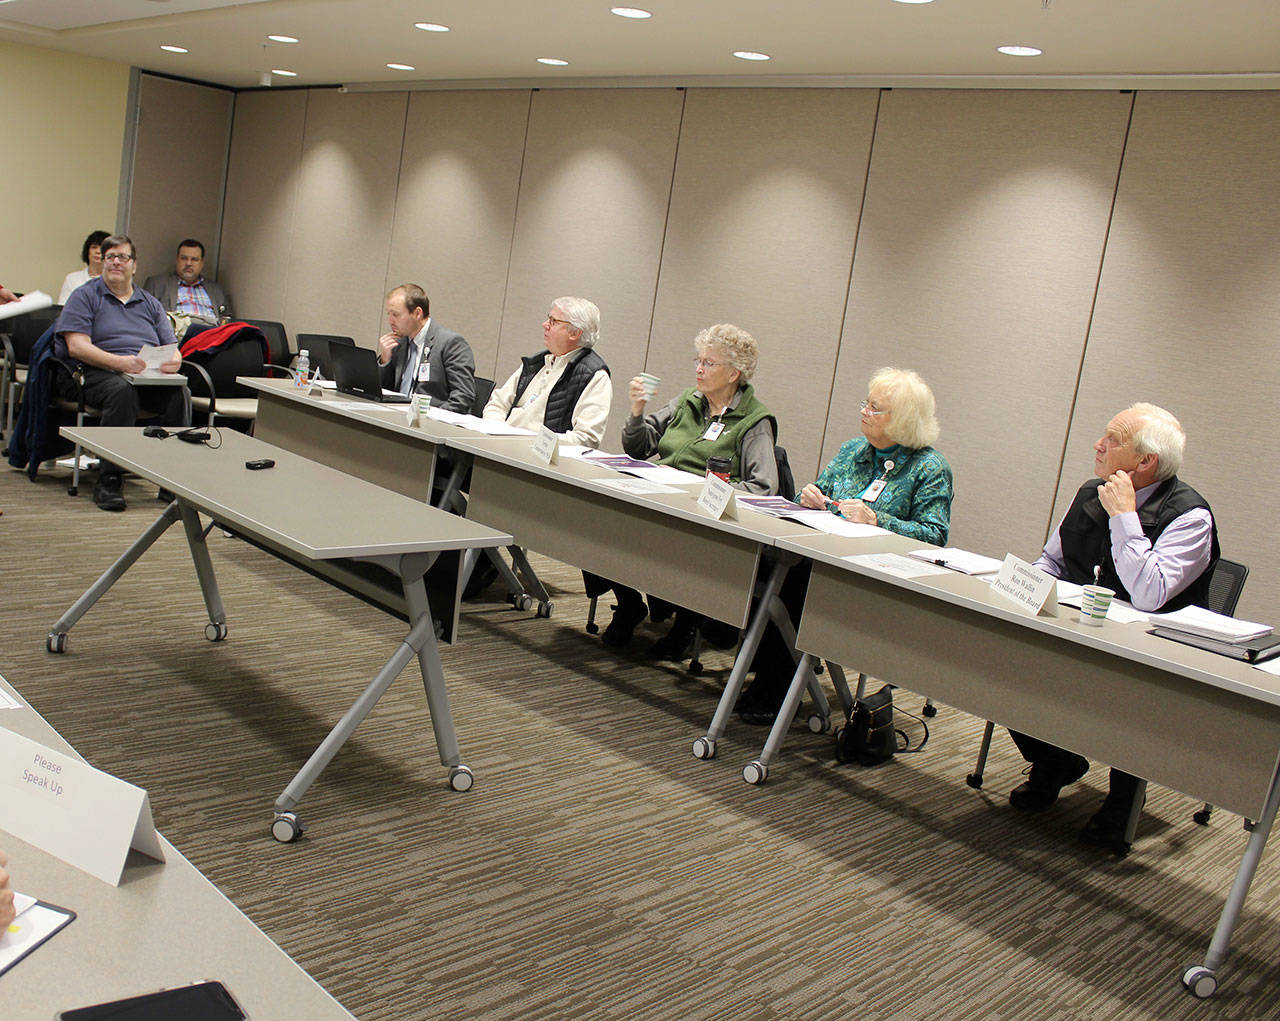 WhidbeyHealth commisioners met in the hospital’s new conference room at Monday’s board meeting. (Photo by Patricia Guthrie/Whidbey News Group)